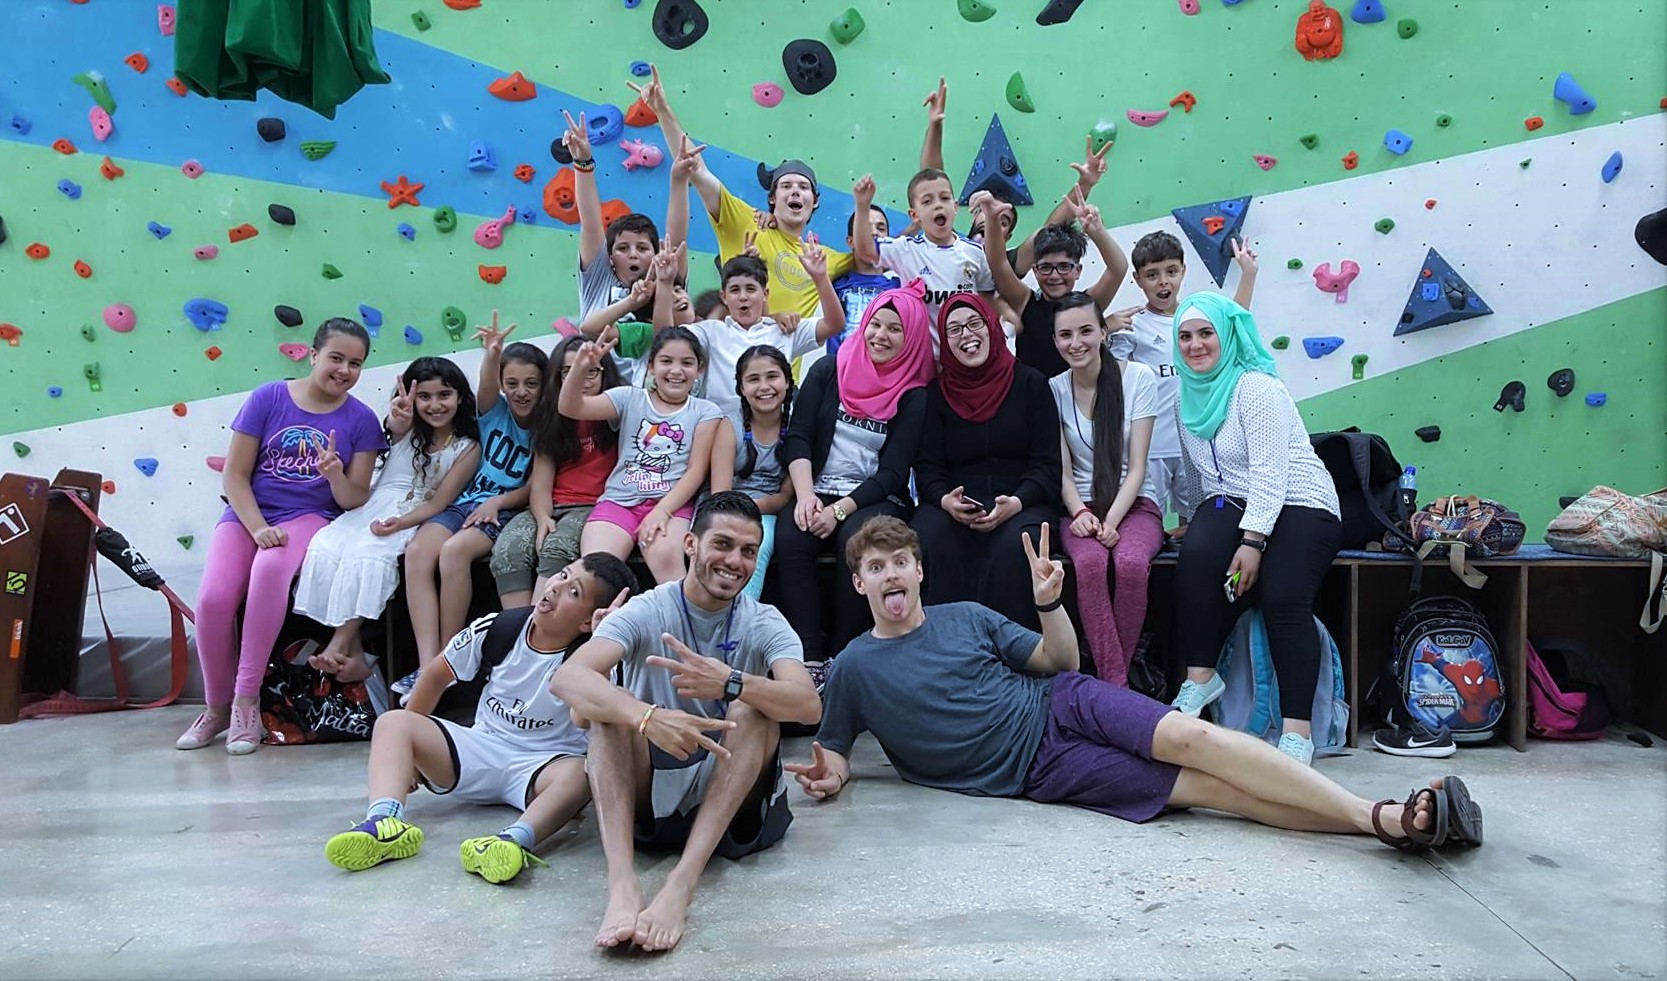 Bruns, Harris with a group of young climbers in the Wadi Climbing Gym they founded in Palestine.